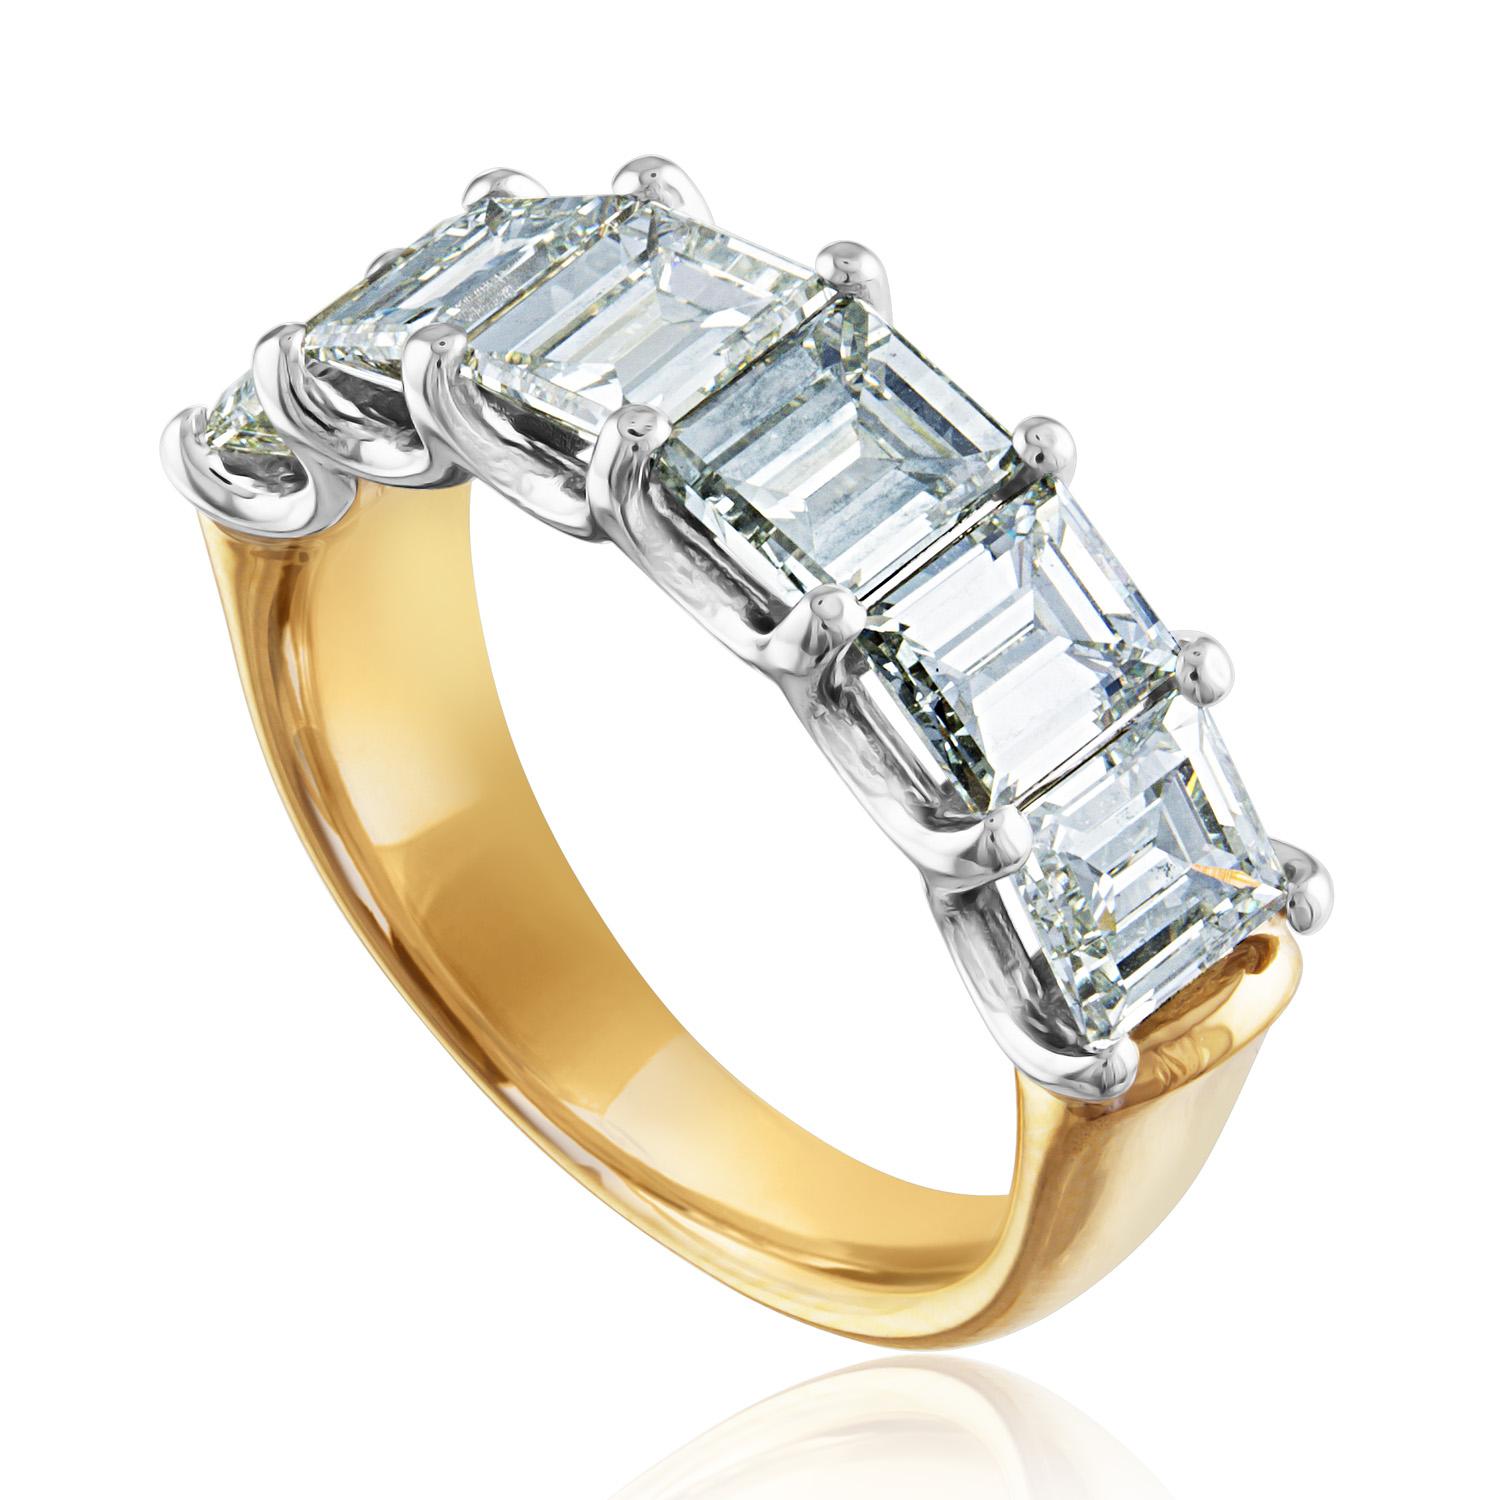 Very Beautiful Diamond Half Band Ring
The ring is 18K Yellow Gold & White Gold
There are 6 Carre Cut Diamonds prong set
There are 3.14 Carats In Diamonds H/I VS
The ring is a size 5.75, sizable. 
The band is 6.75mm and tapers down to 4.5mm. 
The